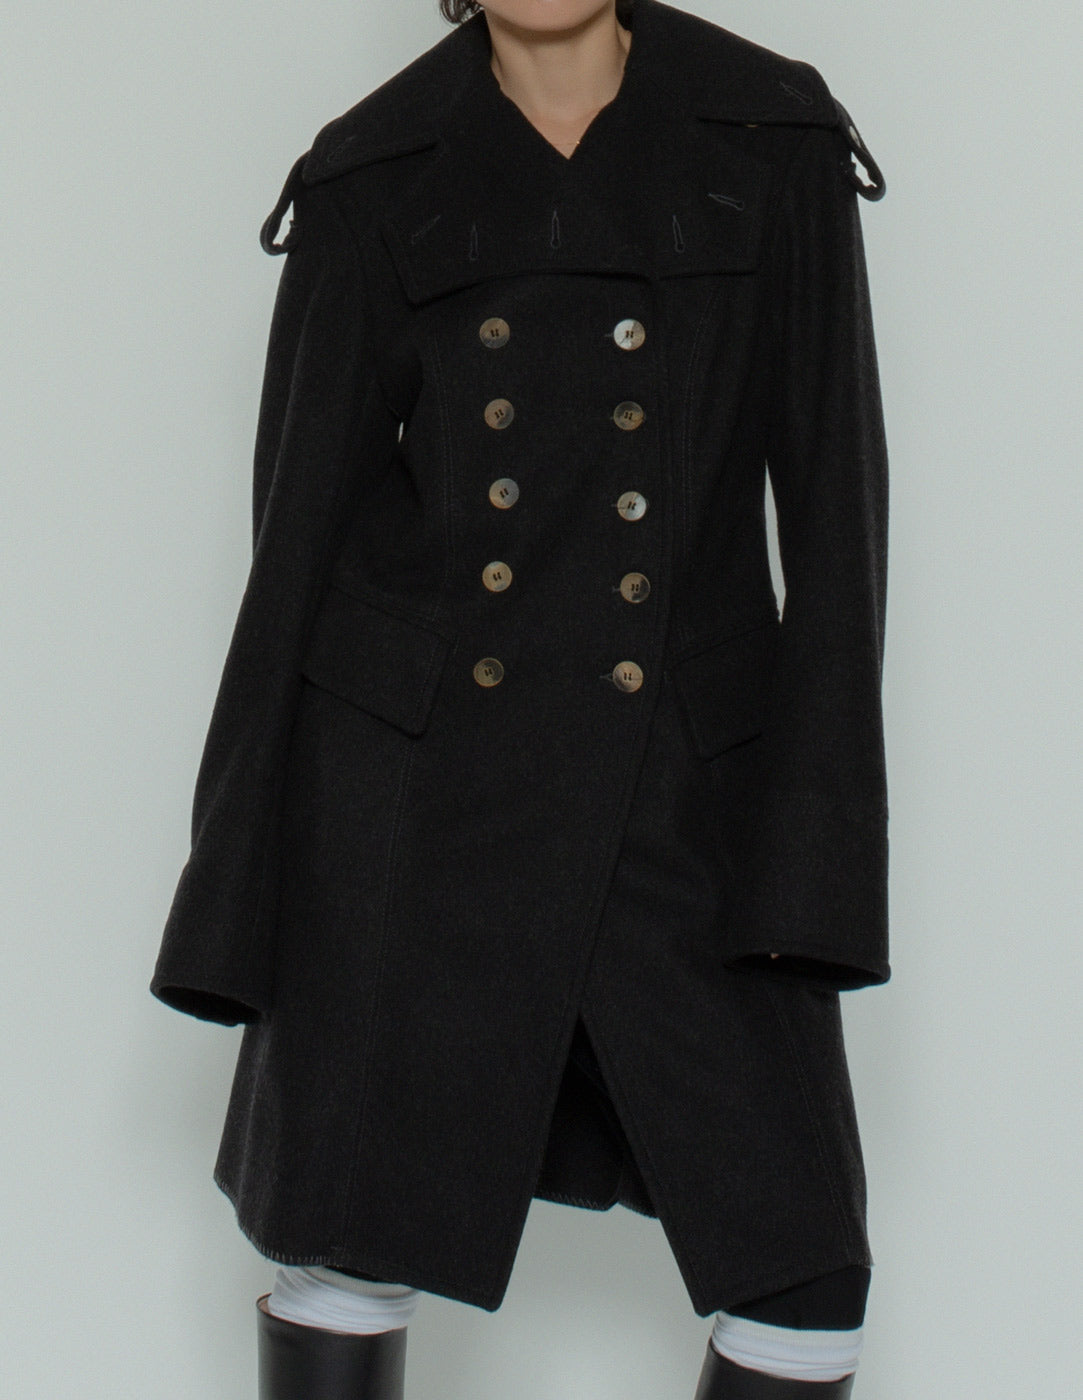 Plein Sud vintage military style wool coat front detail